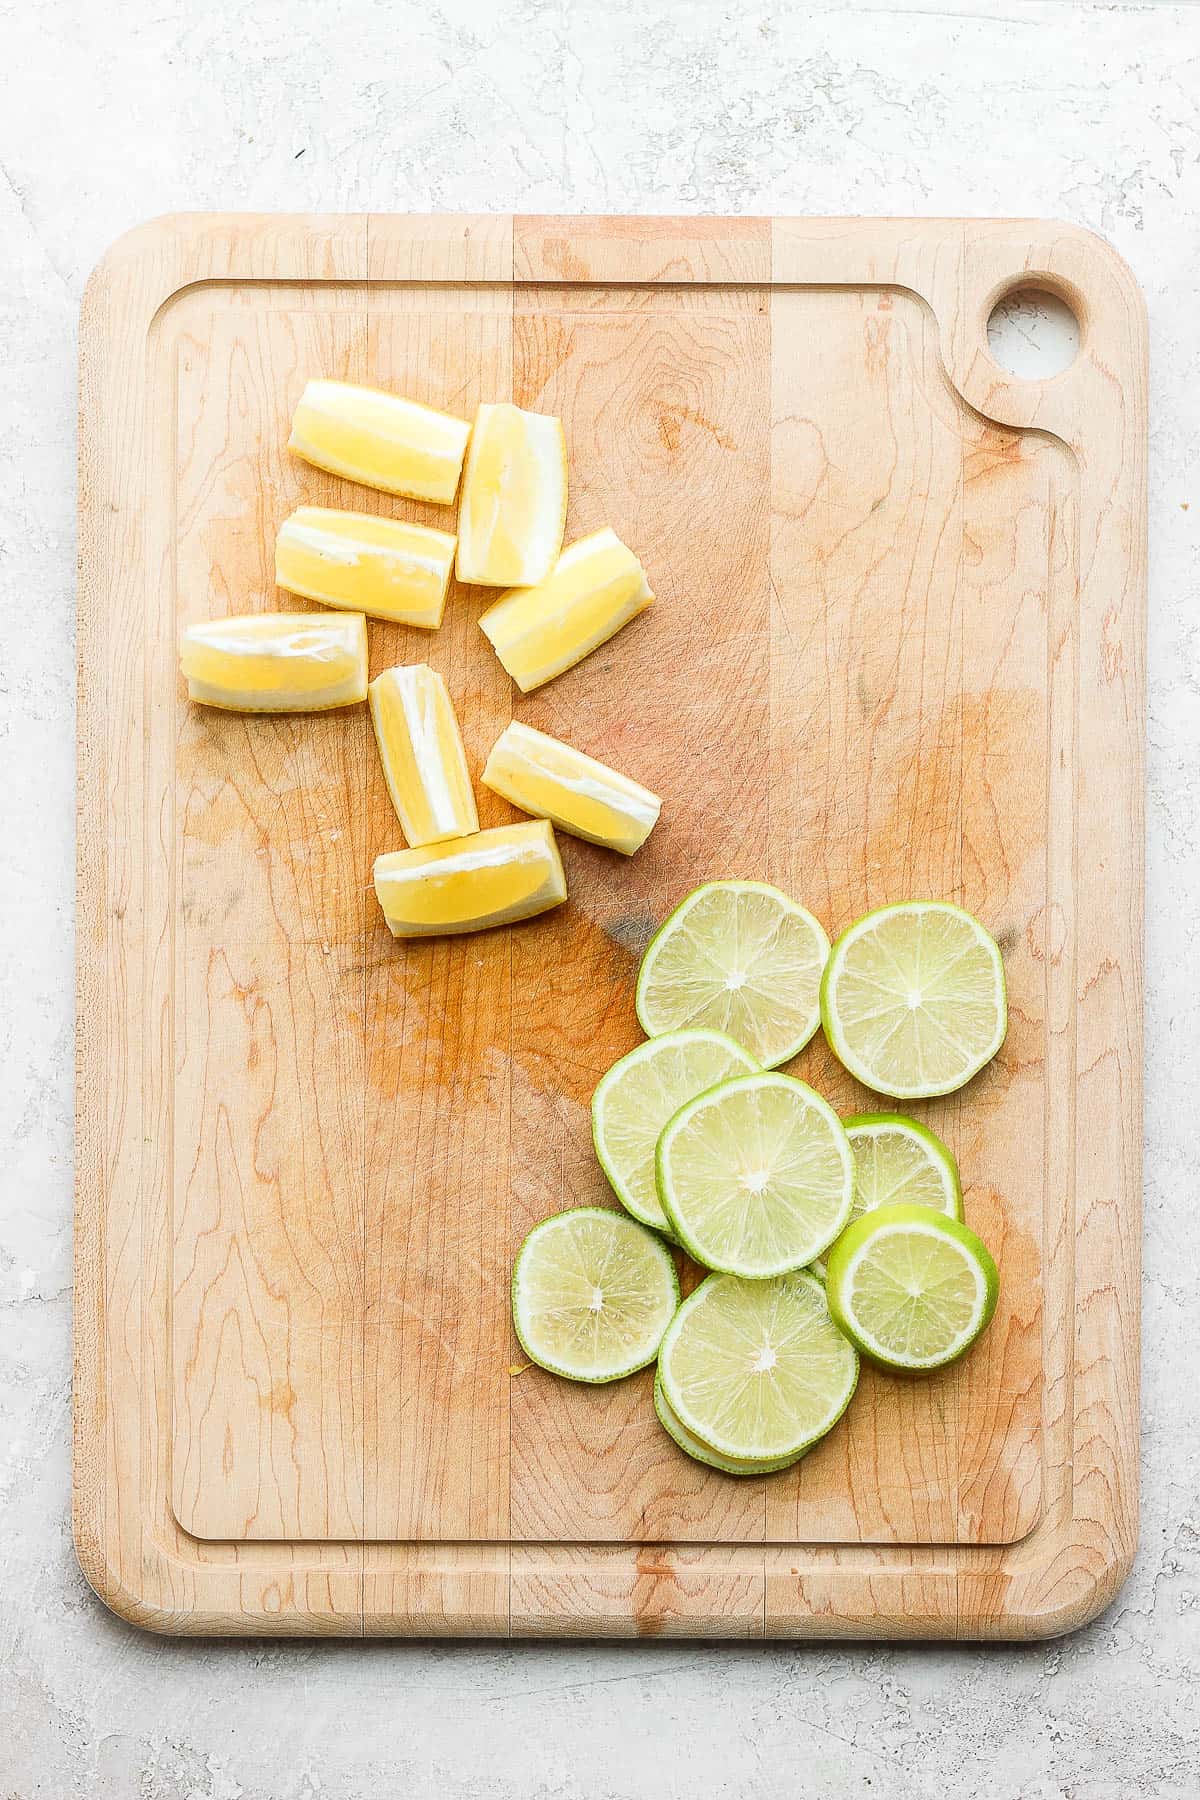 Cutting board with lemon wedges and lime slices